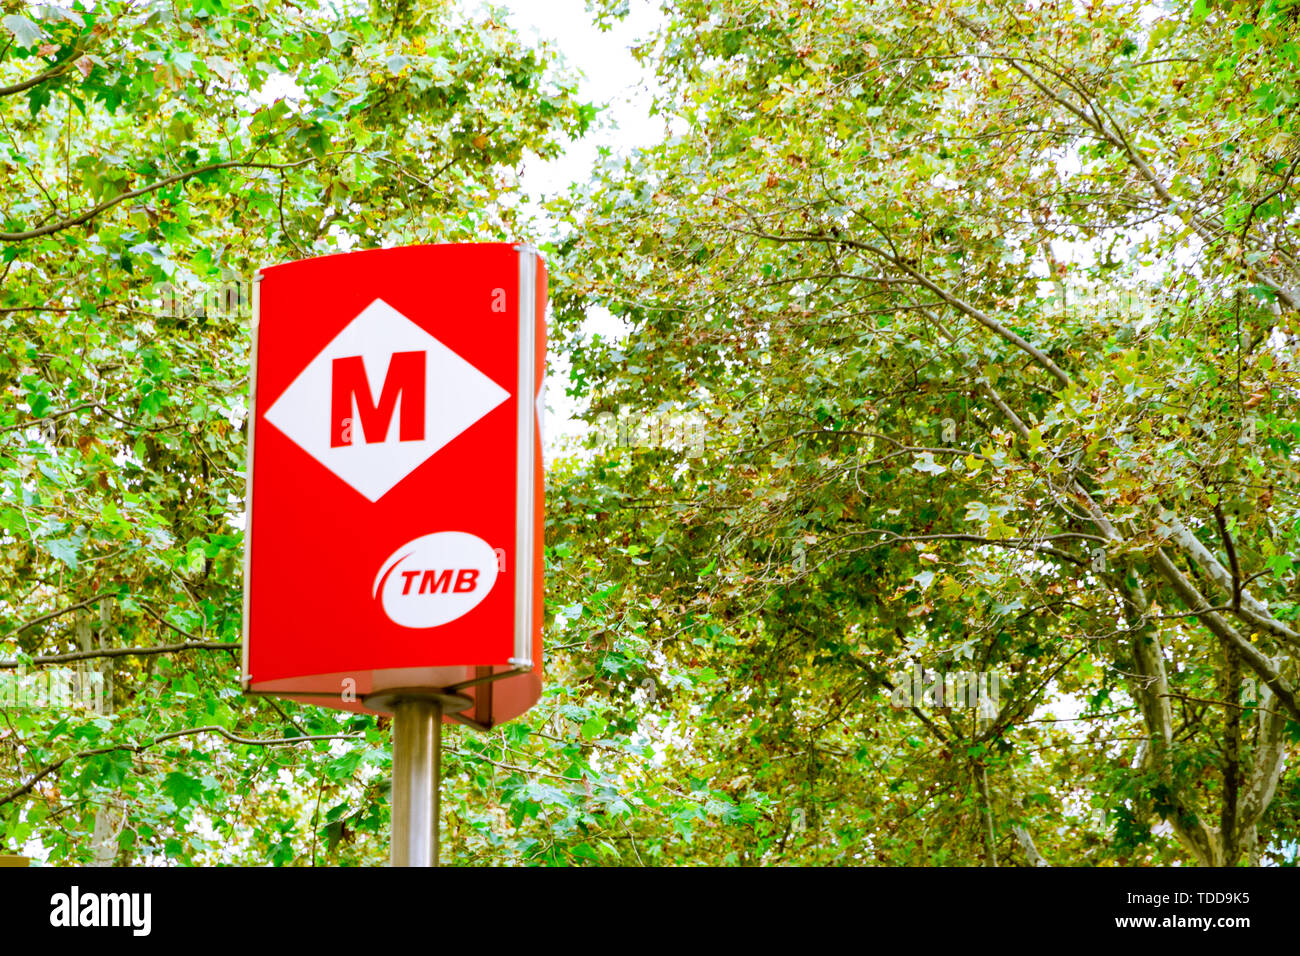 Barcelona, Spain - September 08, 2018: Trees and subway sign in the Rambla in summer in Barcelona, Spain Stock Photo